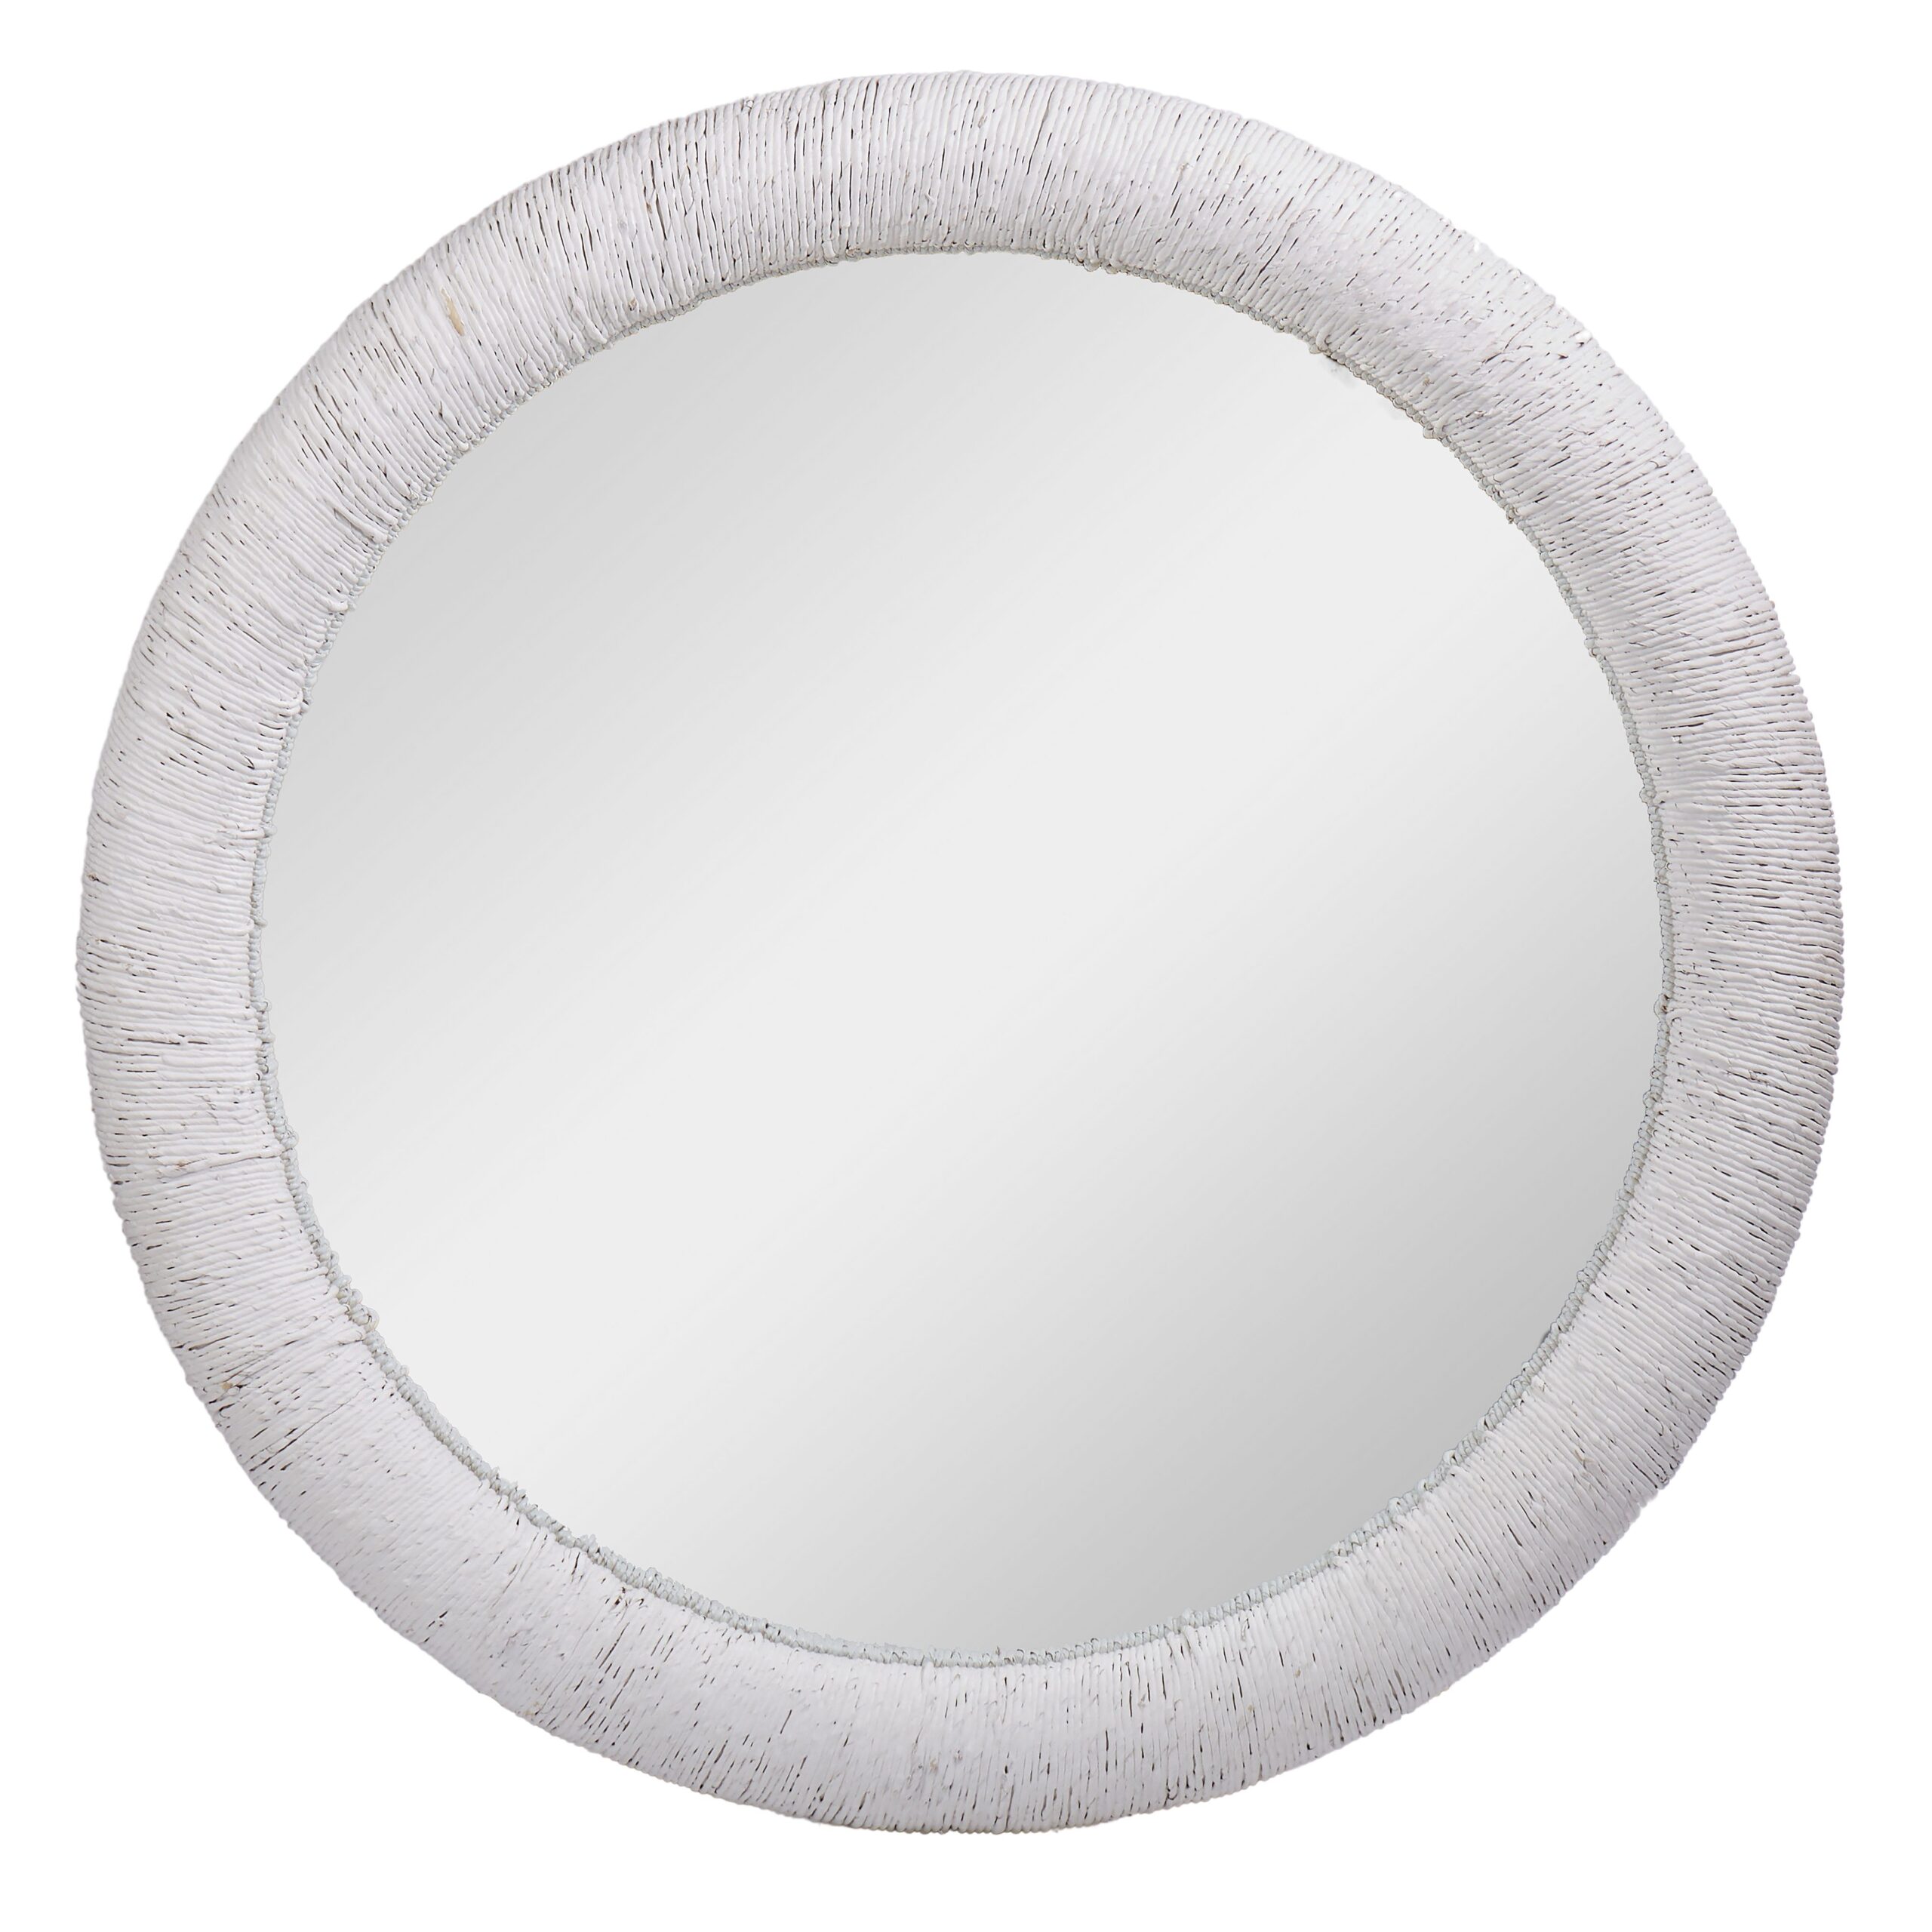 ROPE EFFECT WALL MIRROR WHITE 117.5X7.5X117.5CM